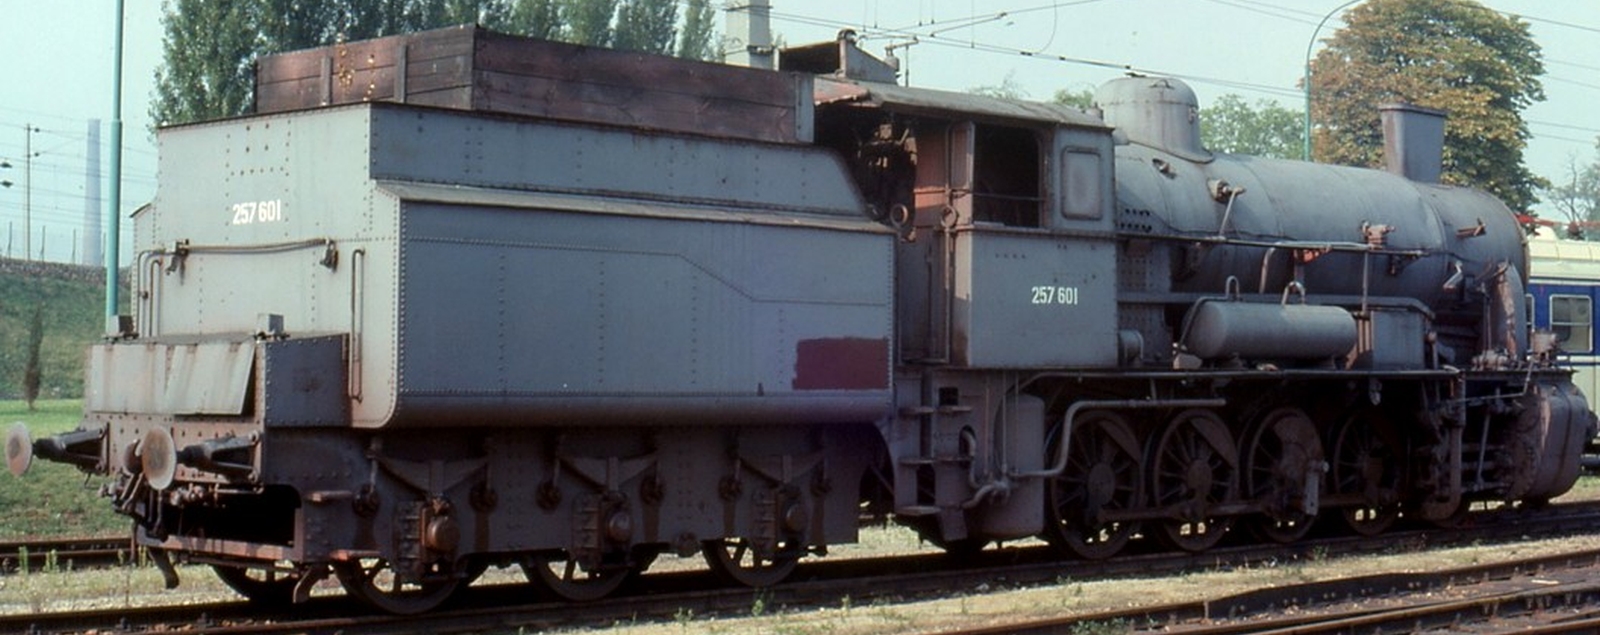 257 601 partly dismantled in October 1978 at the ÖBB open day in Floridsdorf